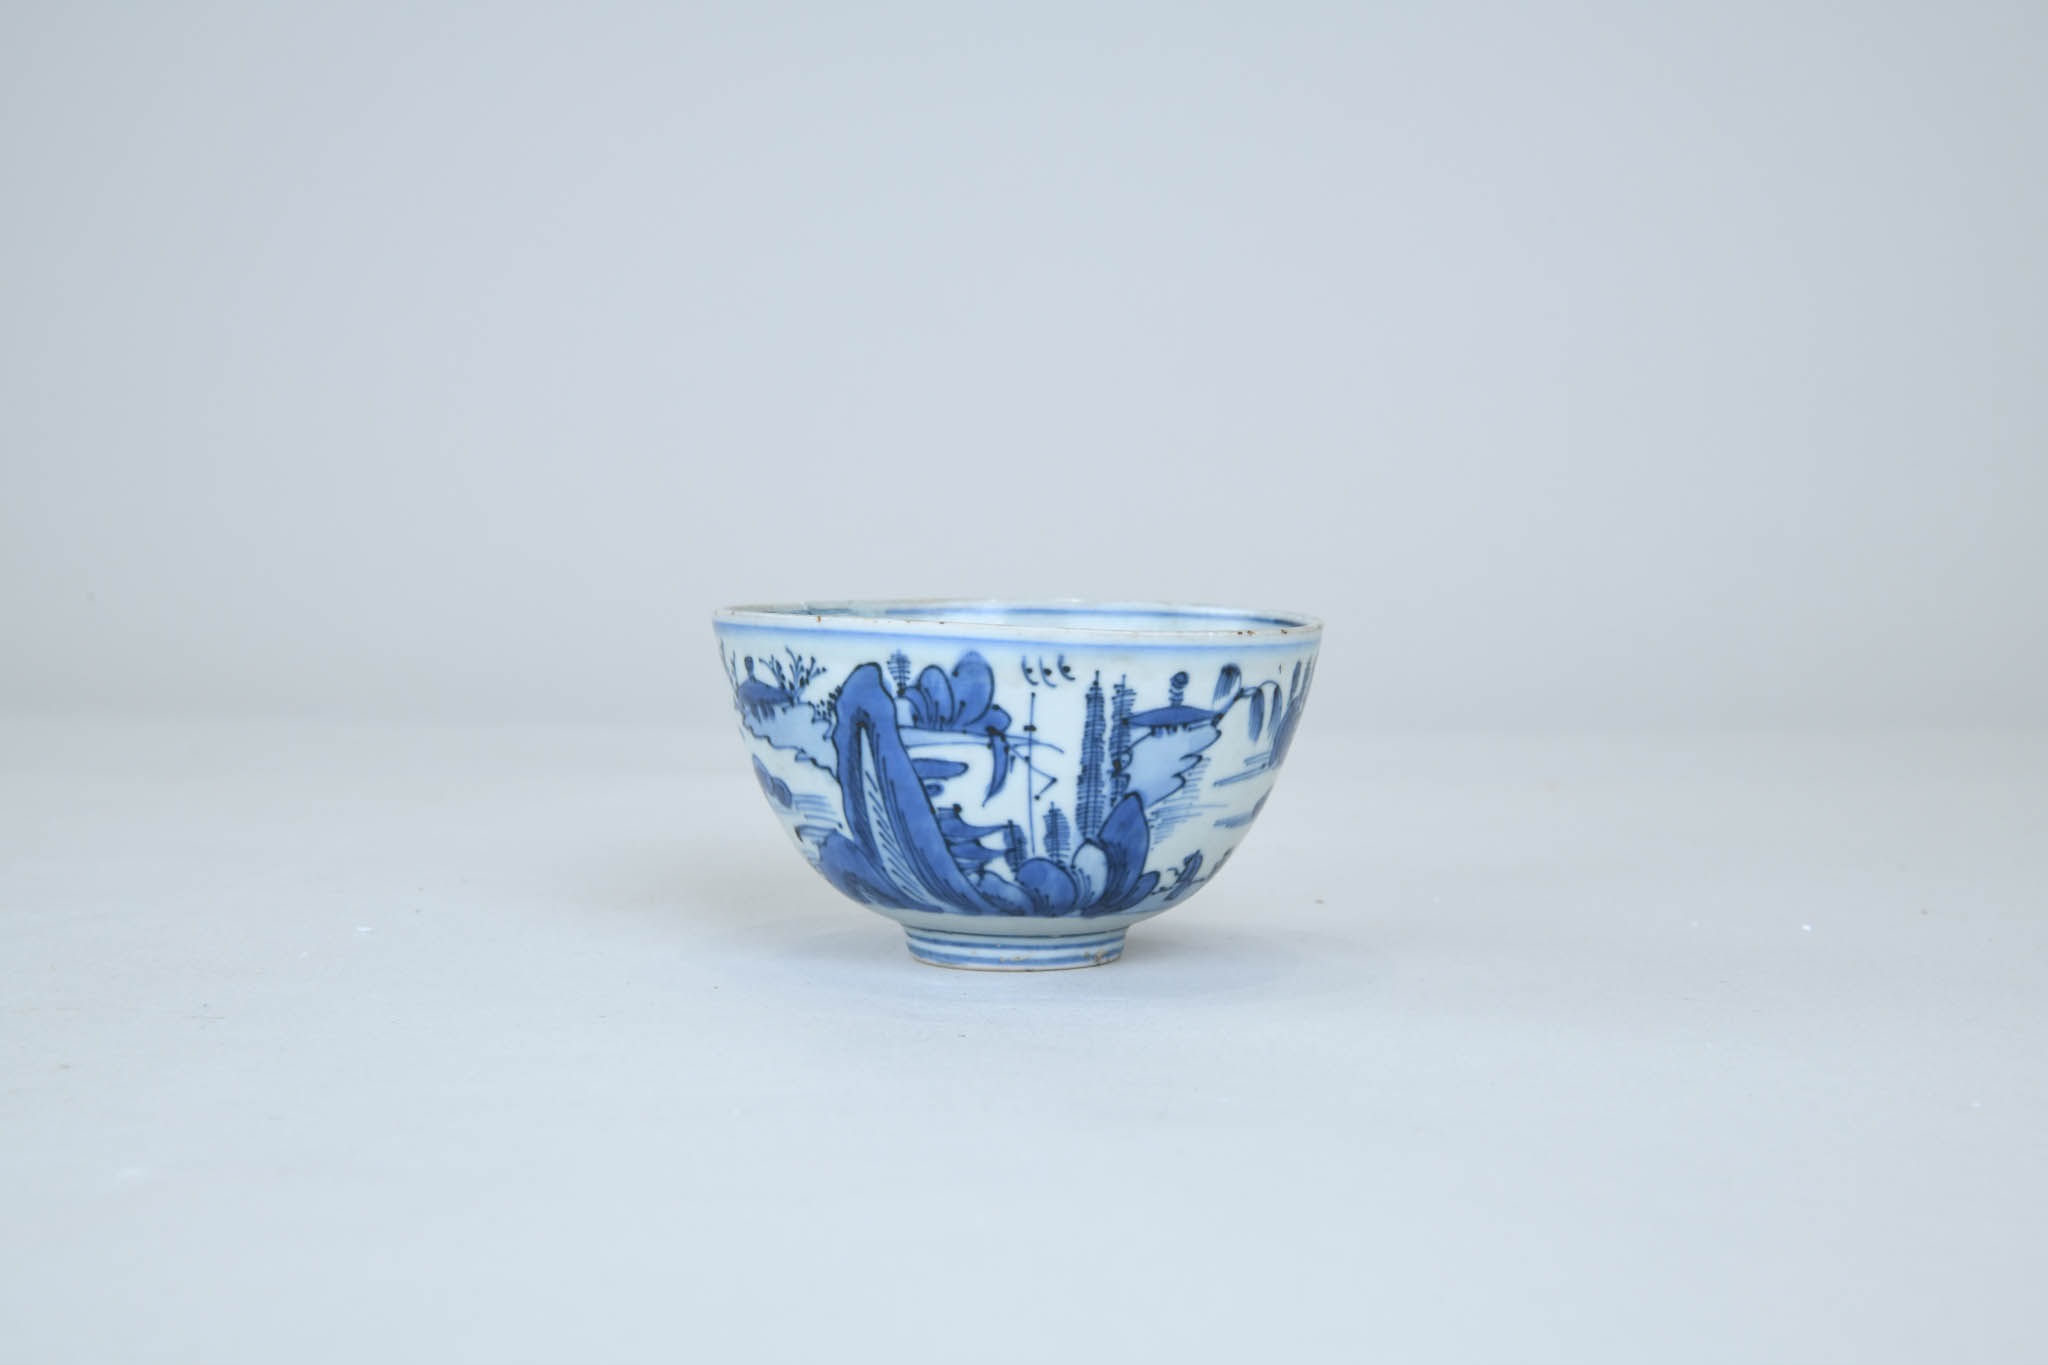 Potted and Painted: The Production and Technical Development of Underglaze Blue Porcelain in China